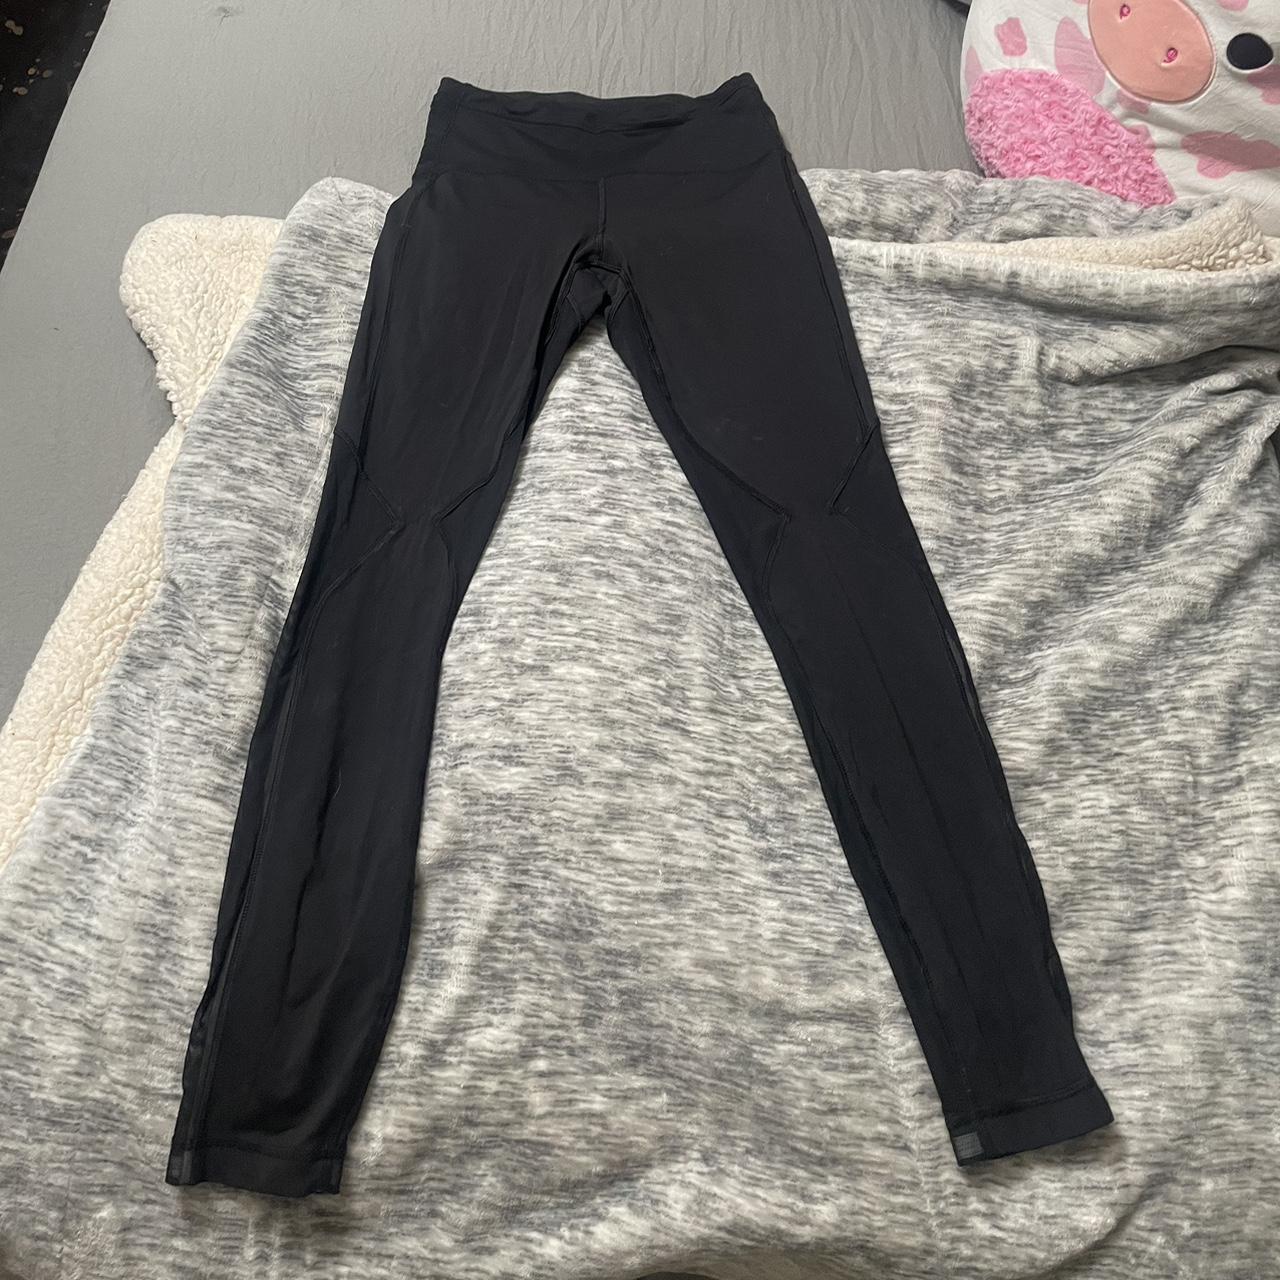 Lululemon mesh cut out leggings Great quality, and - Depop